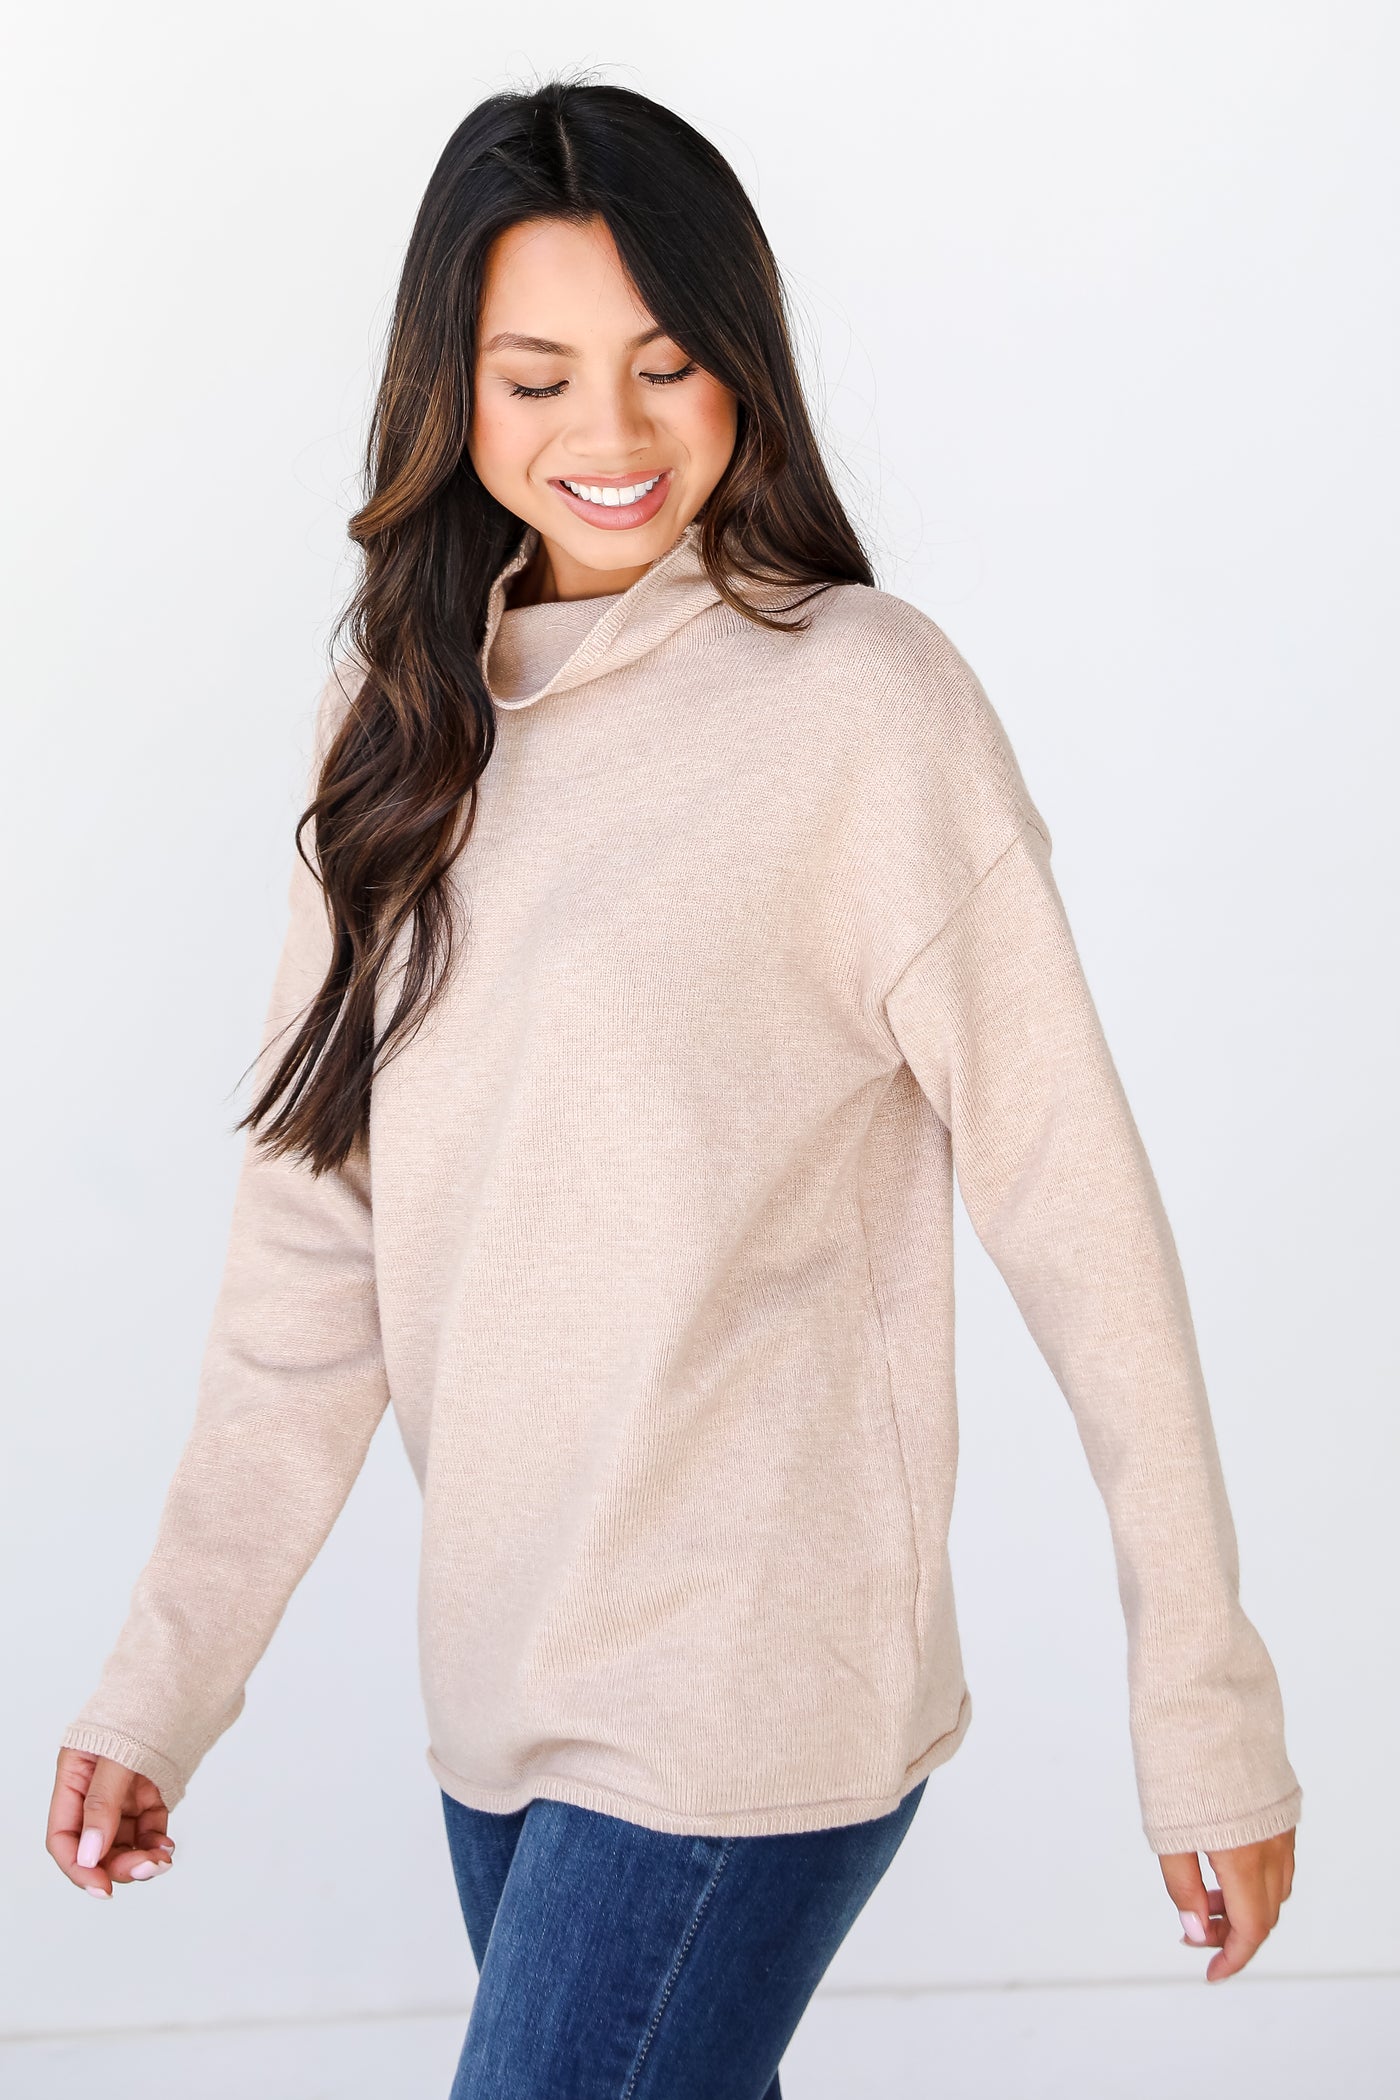 oatmeal Sweater side view